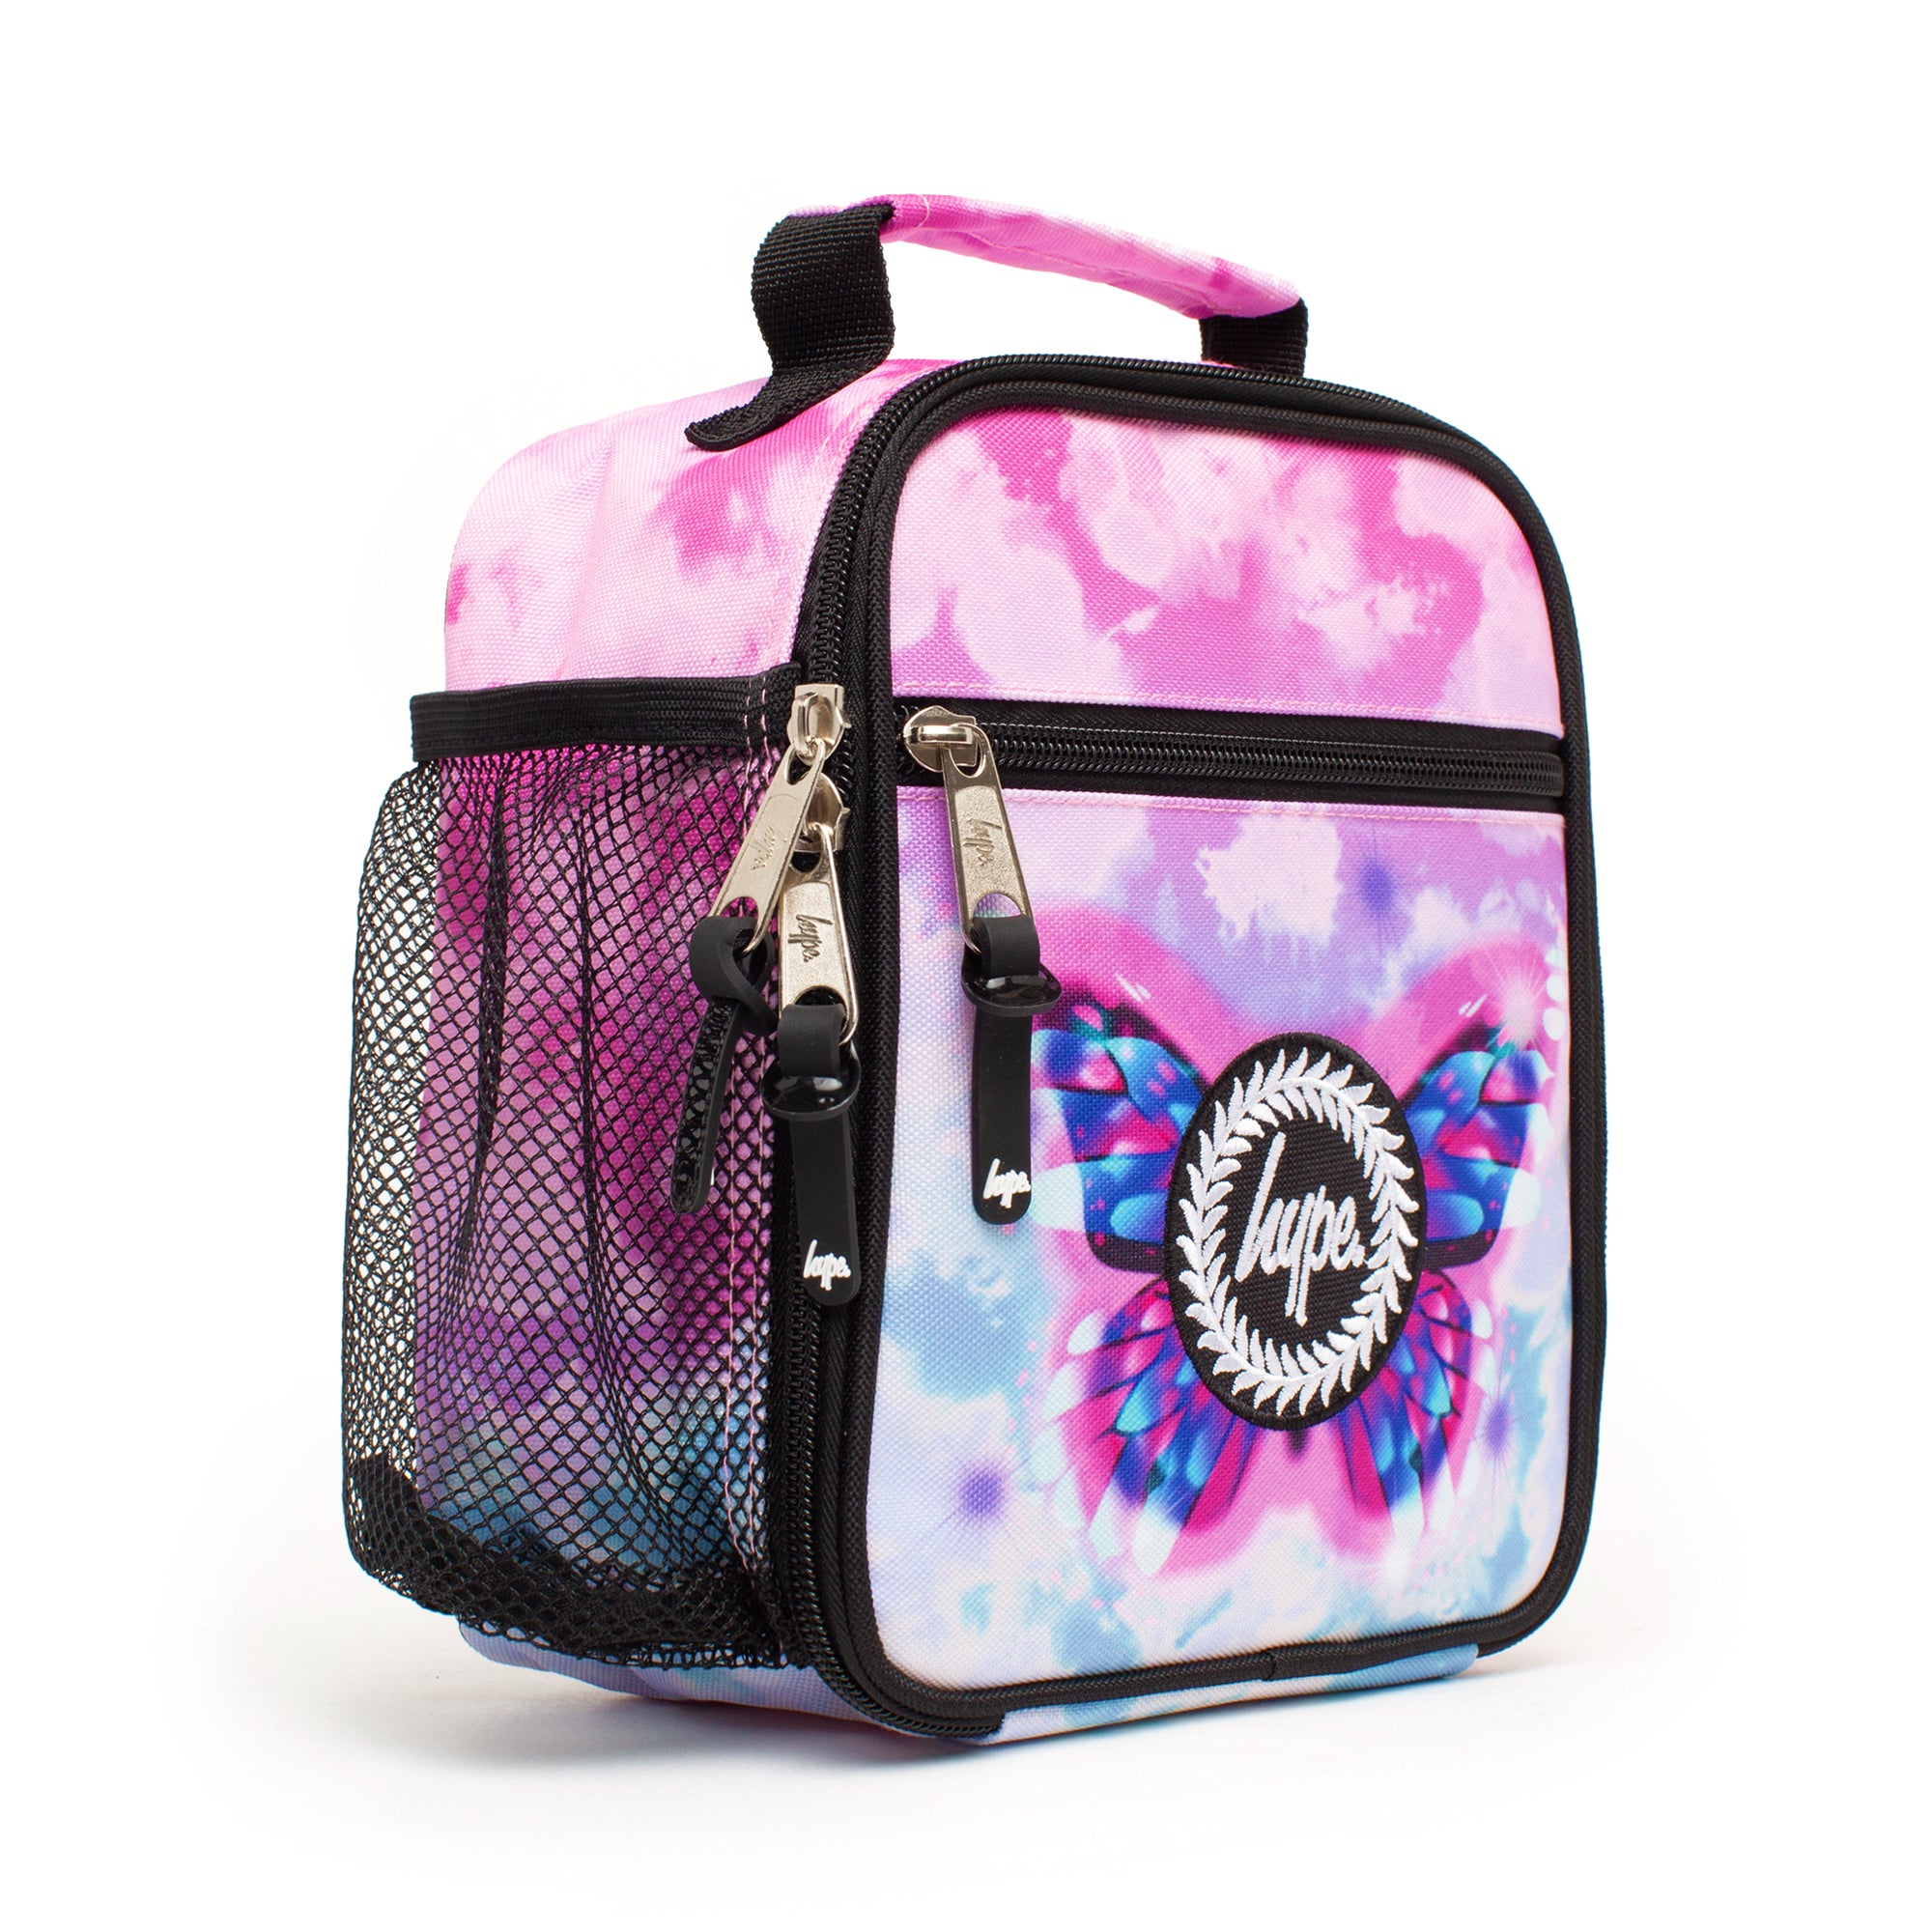 Gradient Skies Butterfly Lunch Box-Lunch Box-Hype-Gradient Skies Butterfly-SchoolBagsAndStuff